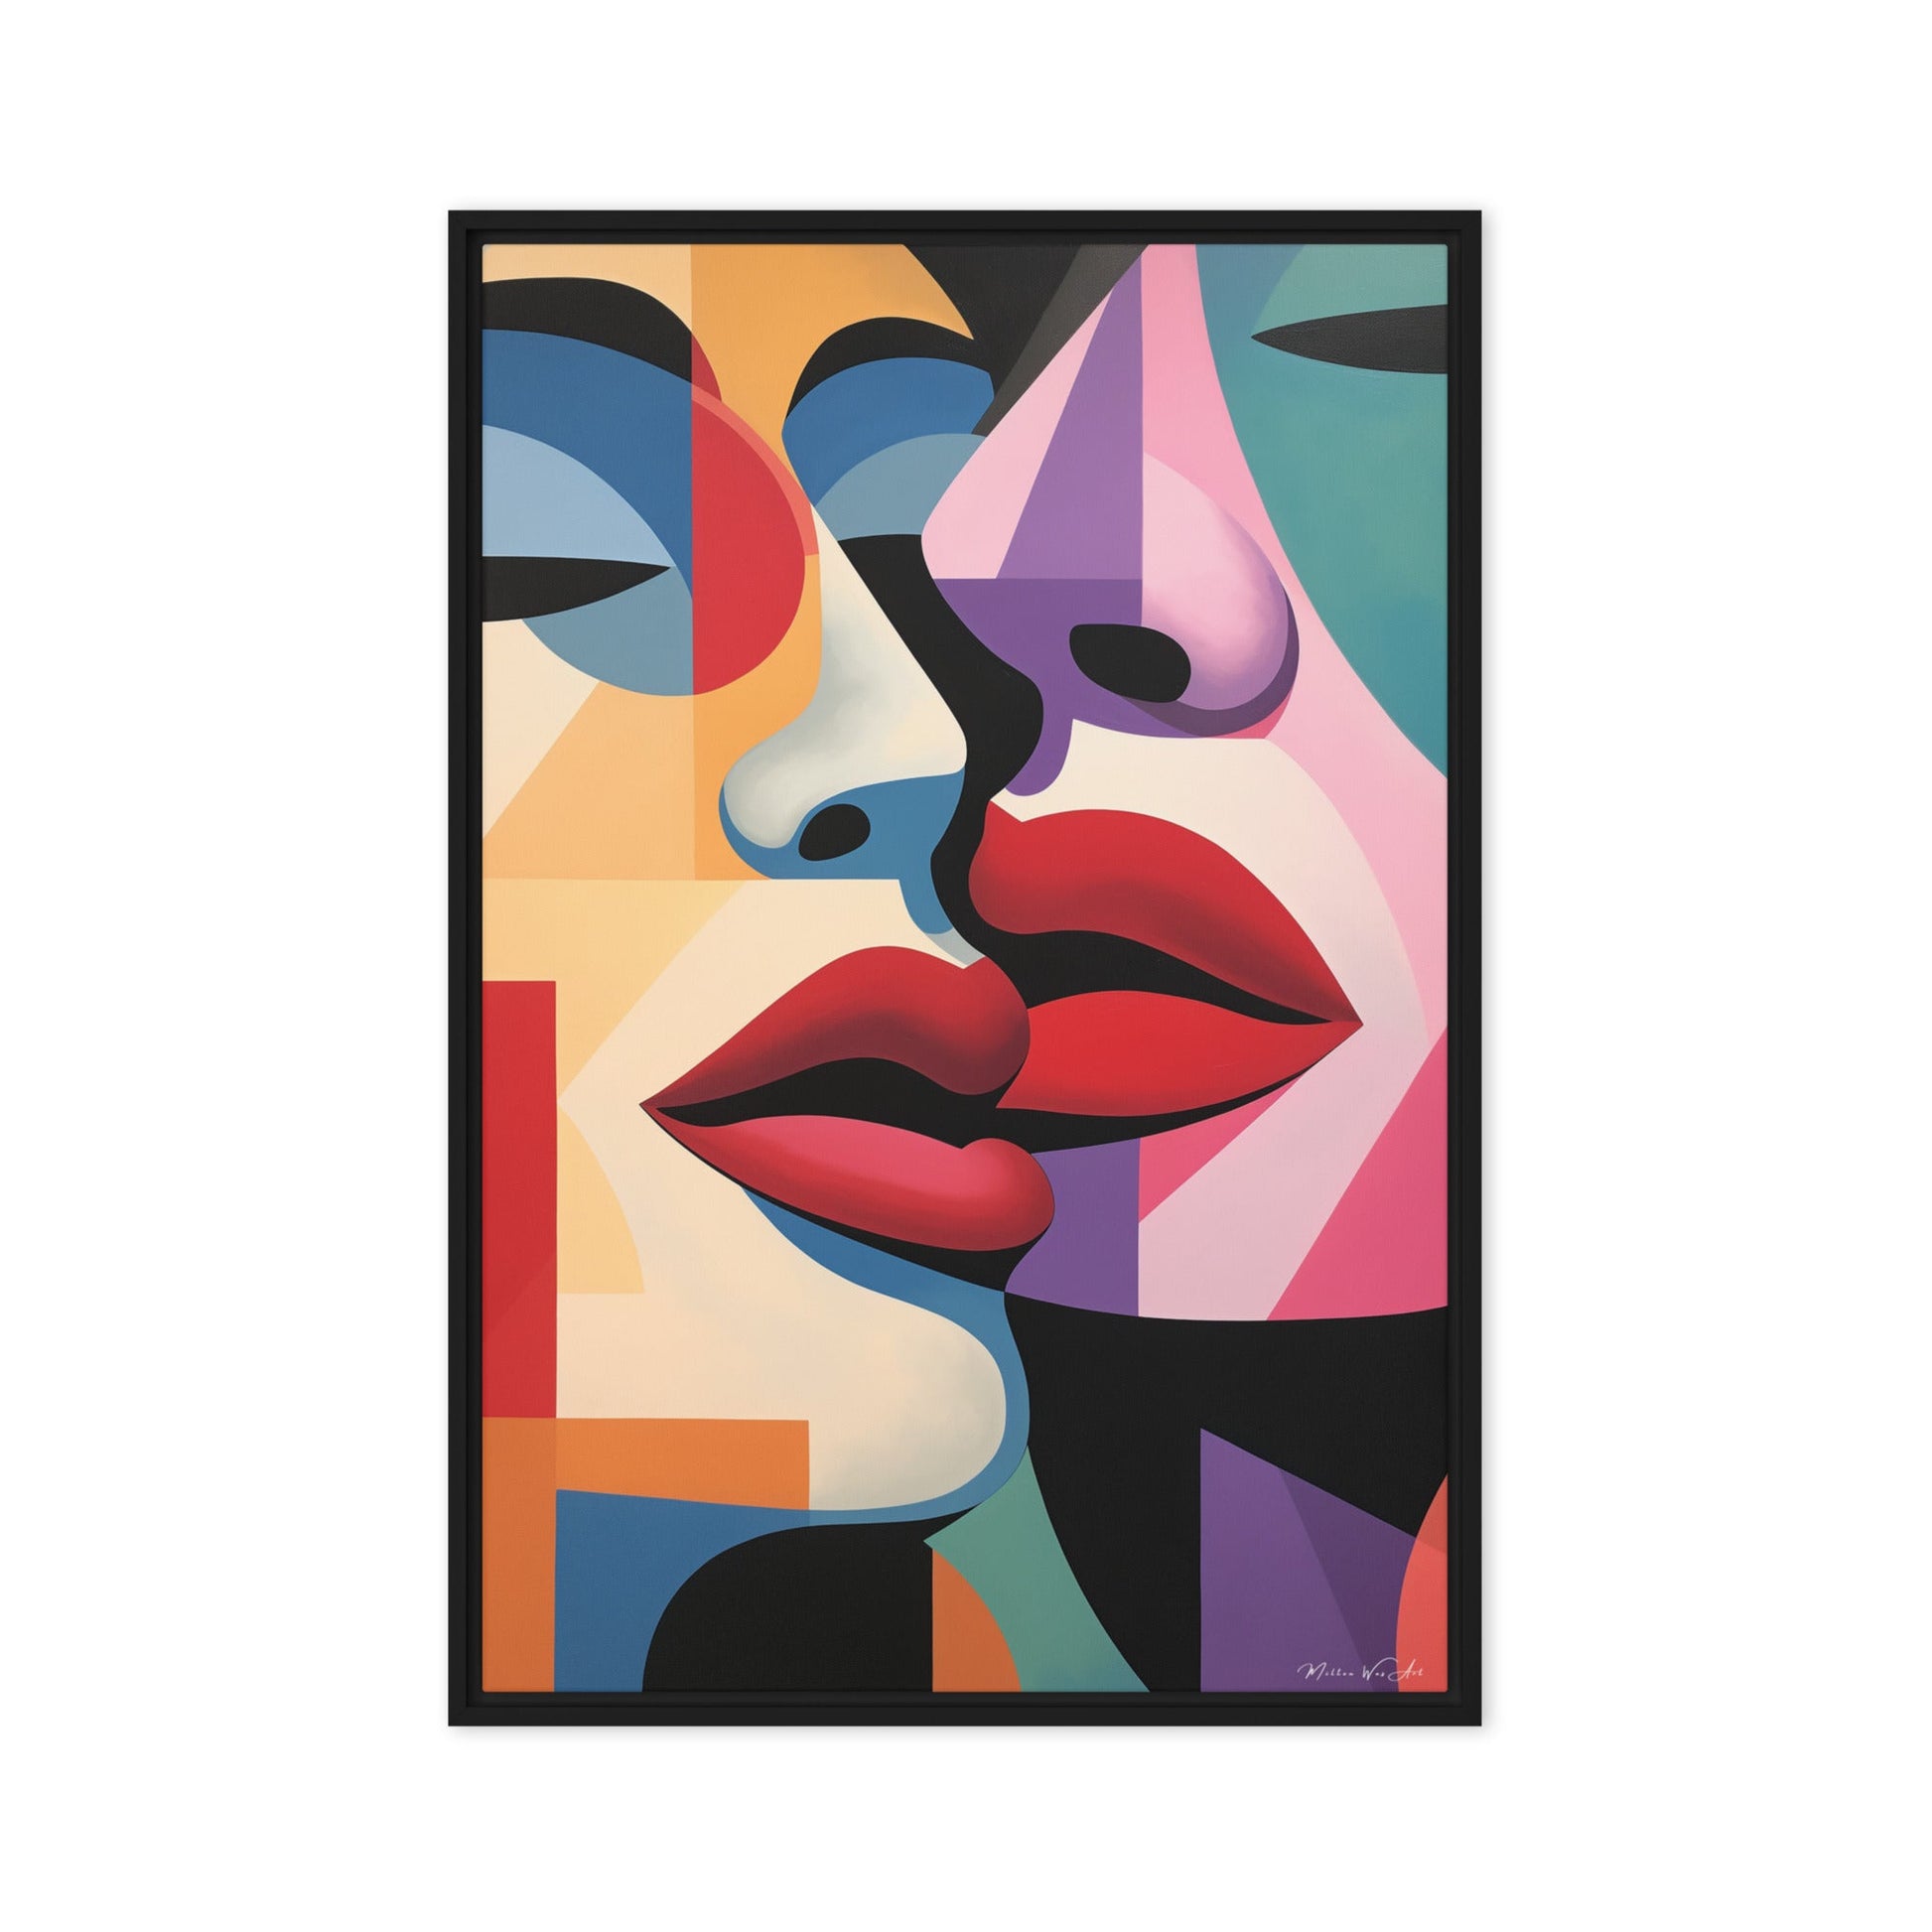 Cubism Fusion: Sisters, Lovers, or Friends - A Digital Art Masterpiece by Corey Wesley - Milton Wes Art Posters, Prints, & Visual Artwork